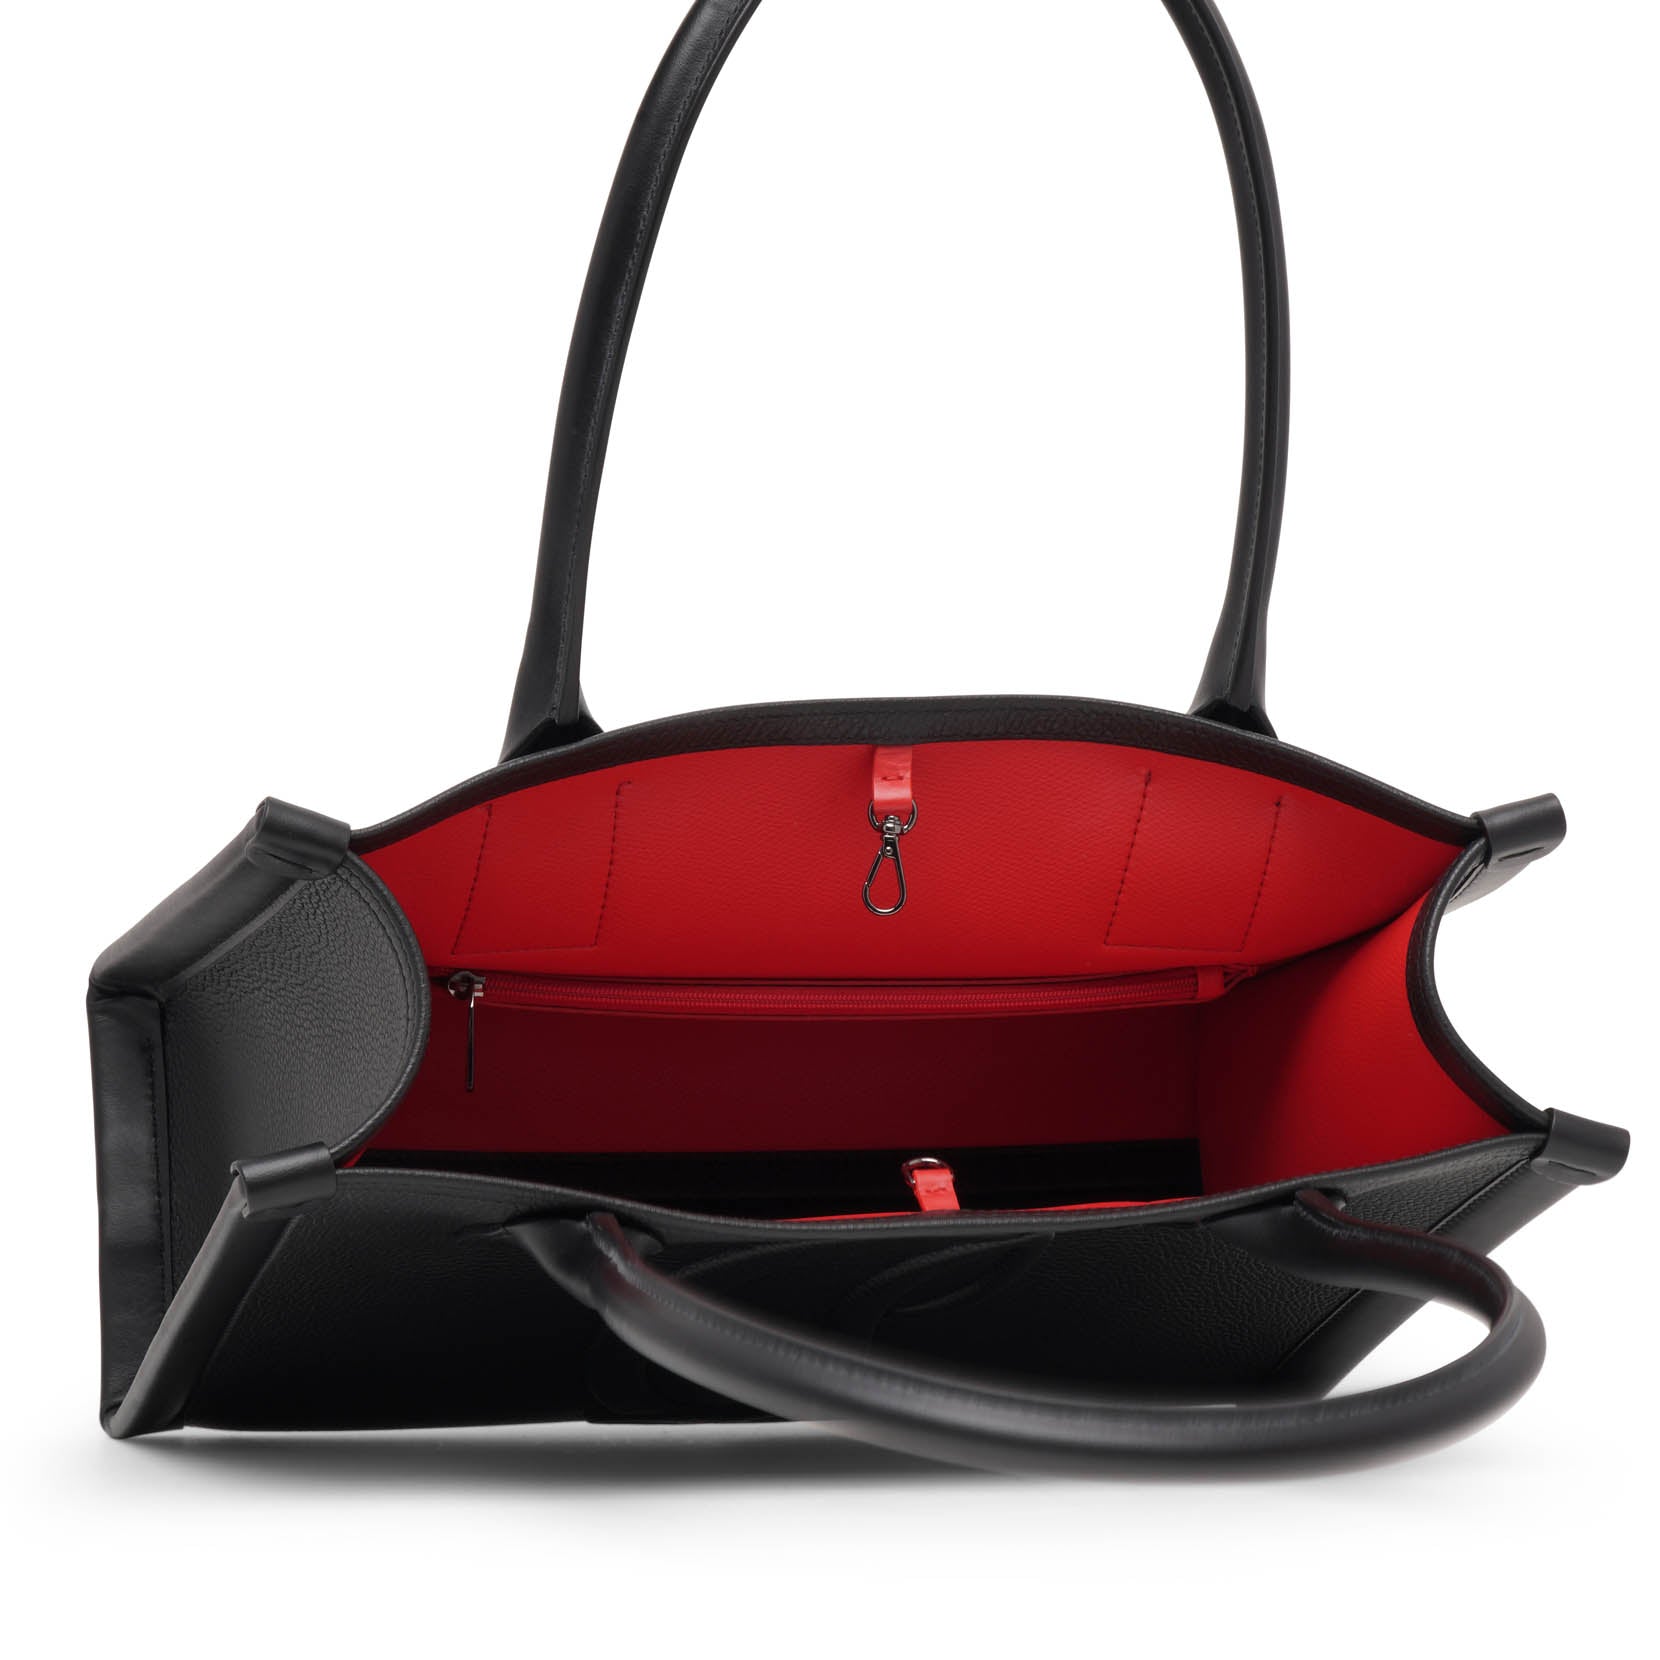 Shop Christian Louboutin By My Side E/w Black Leather Tote Bag